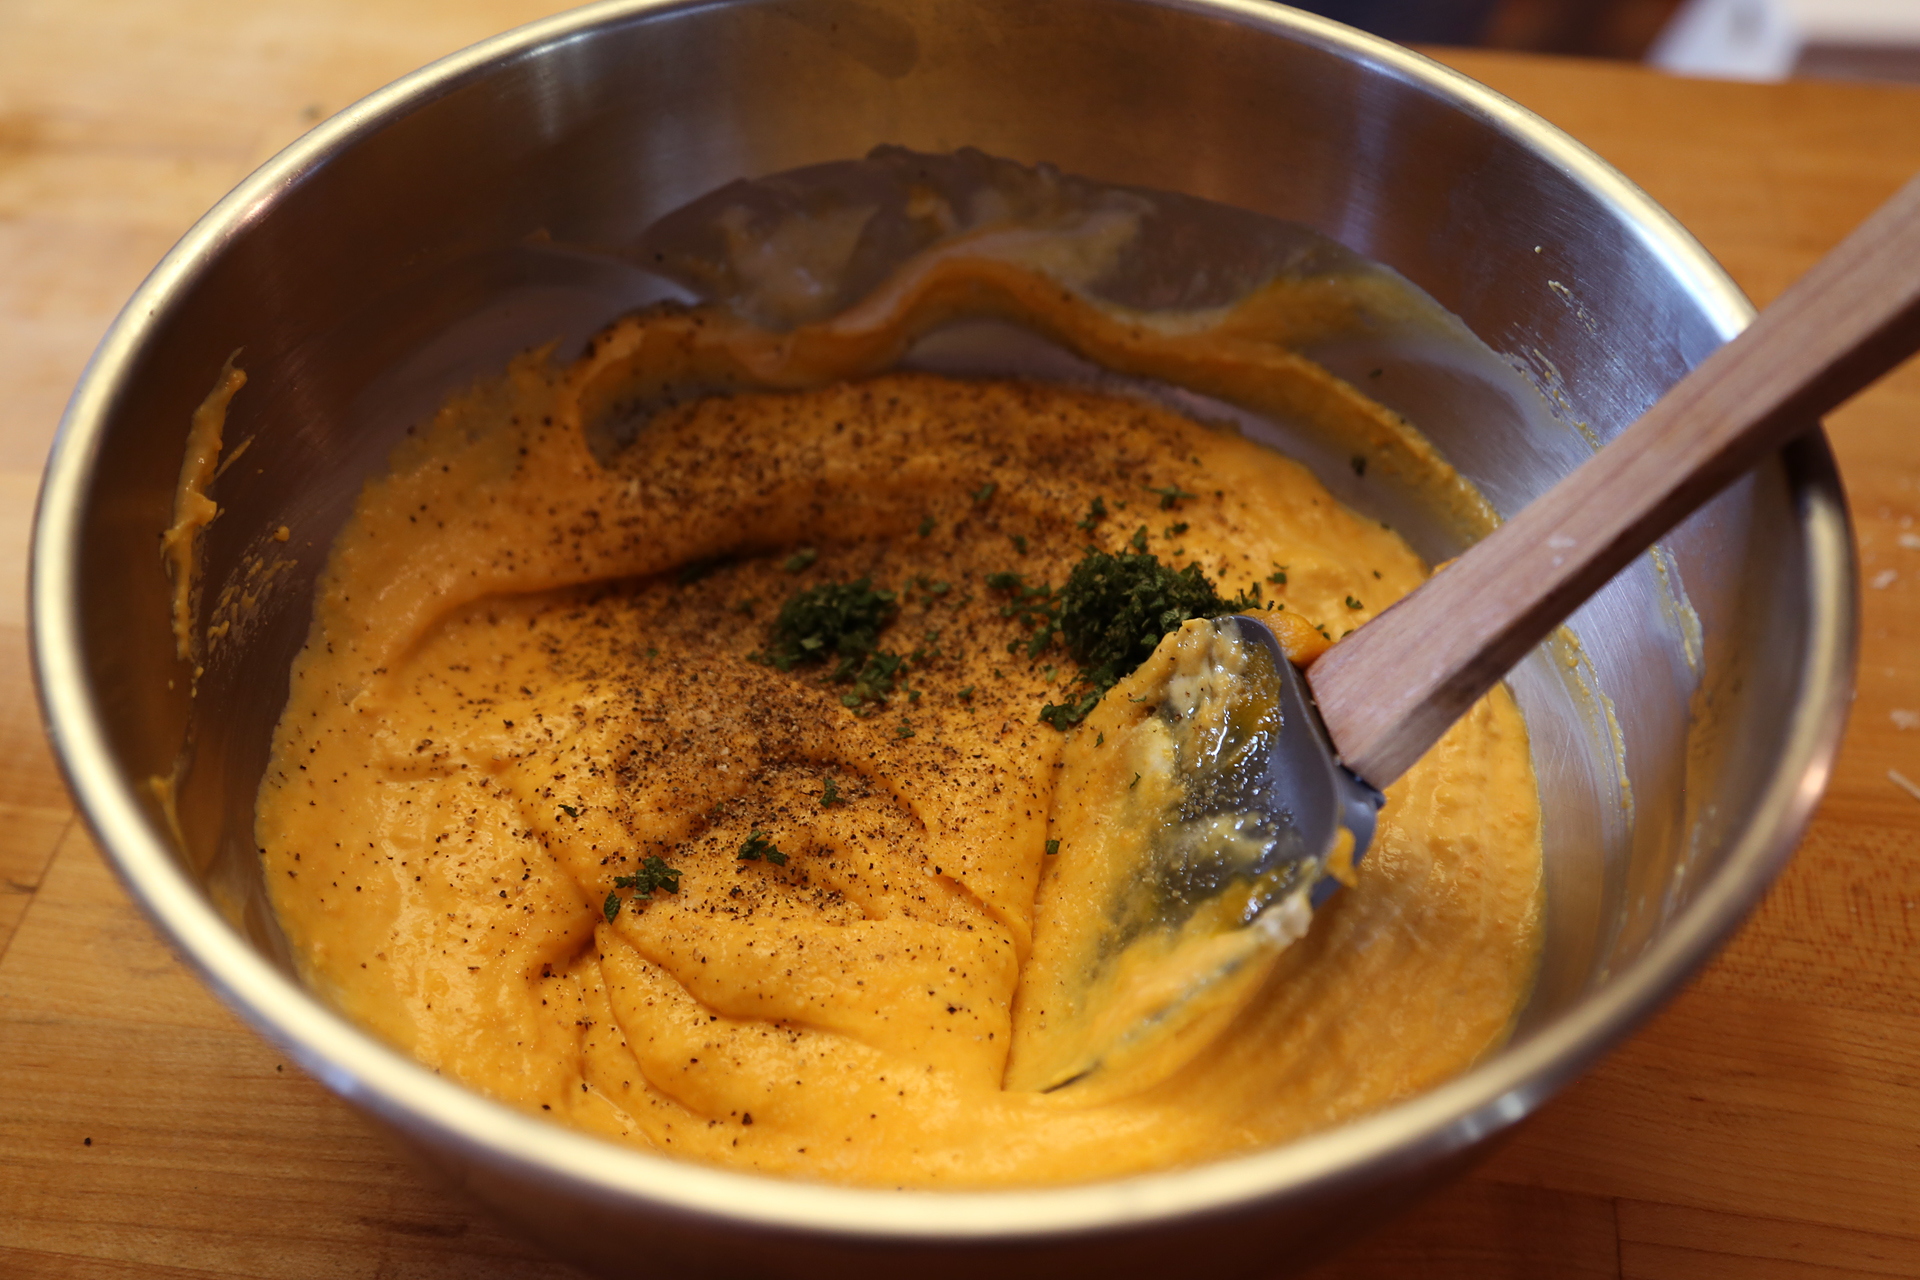 Add the chopped sage, salt and pepper and mix into the puree.